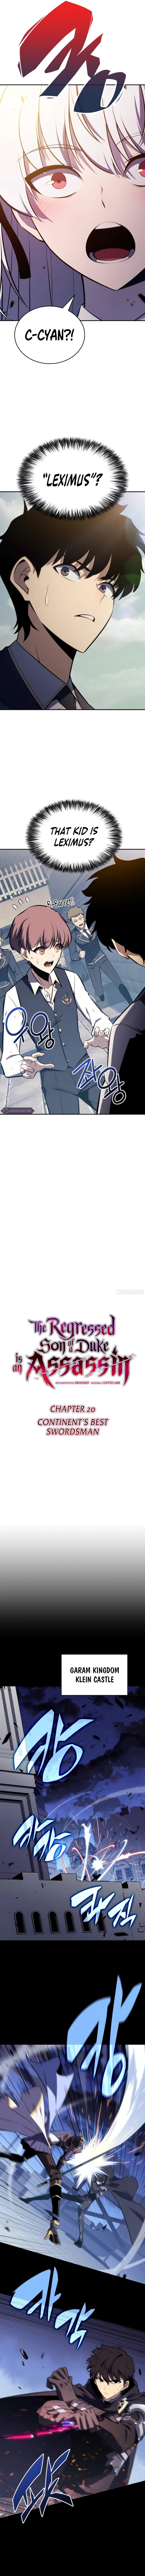 The Regressed Son of a Duke is an Assassin - Chapter 20 Page 5